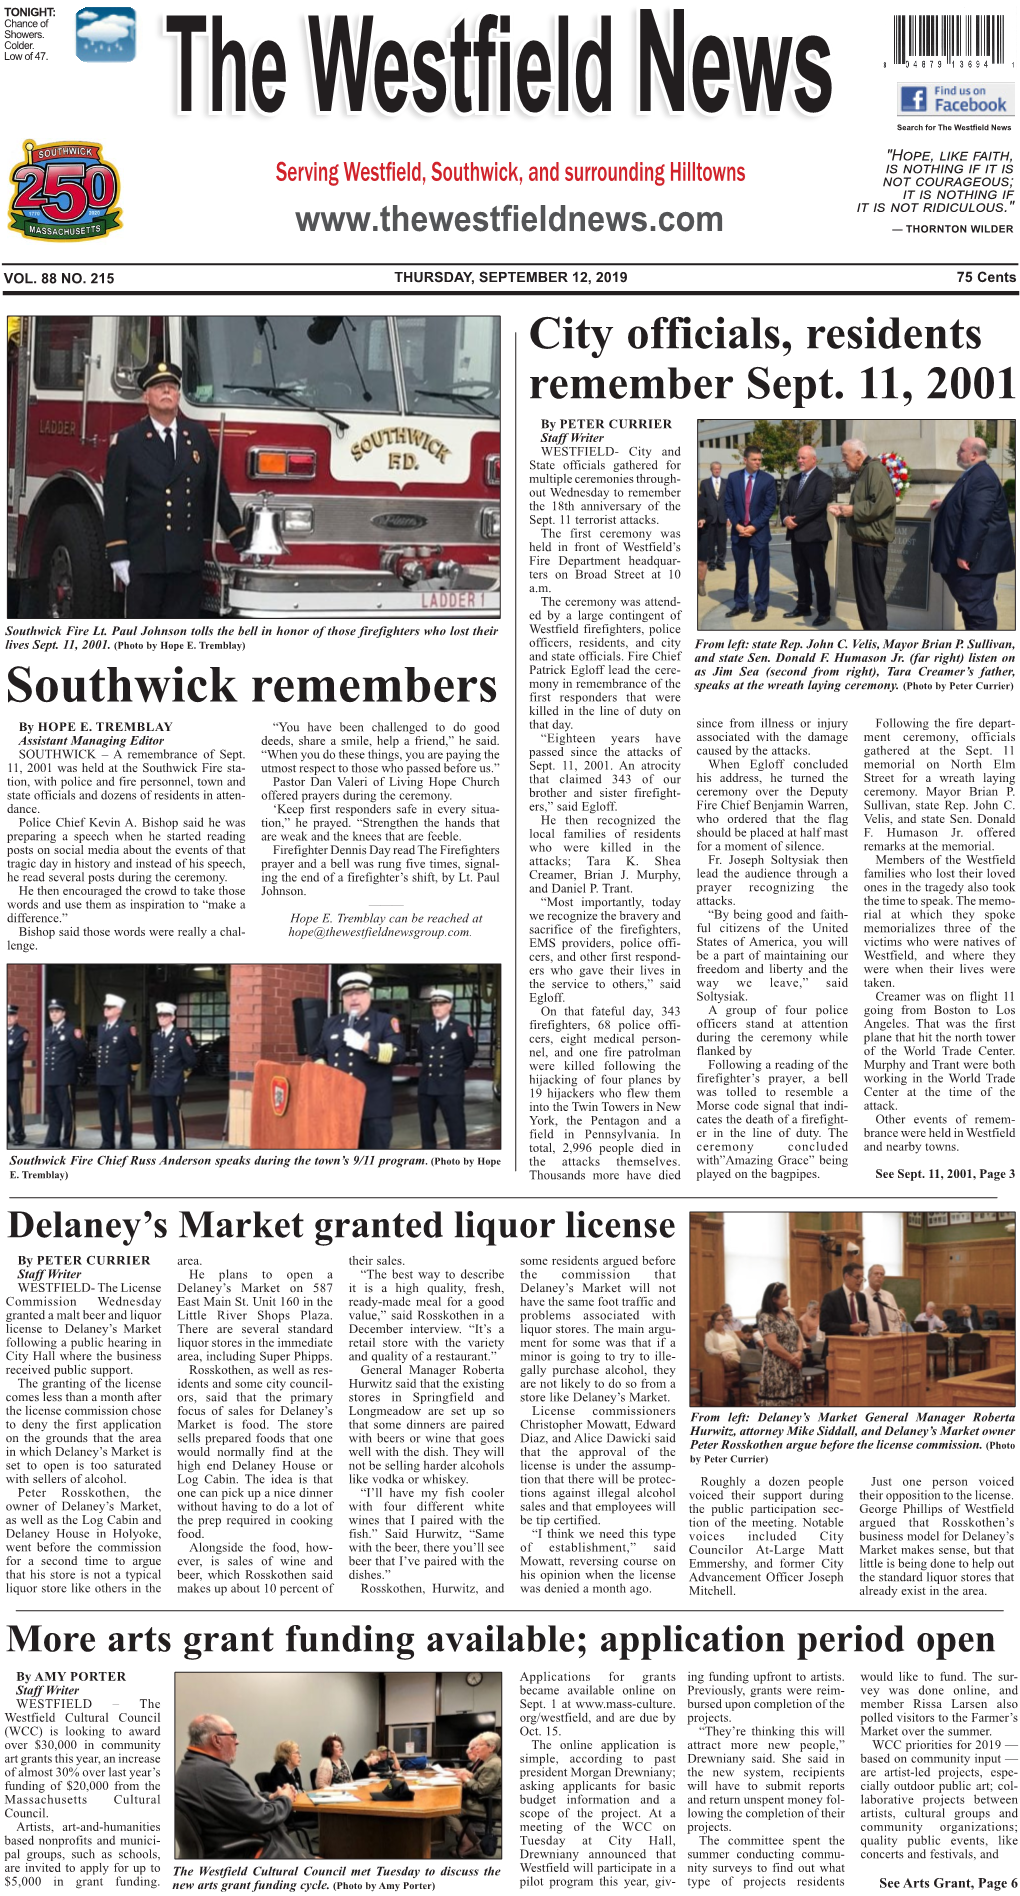 Southwick Remembers First Responders That Were Killed in the Line of Duty on by HOPE E